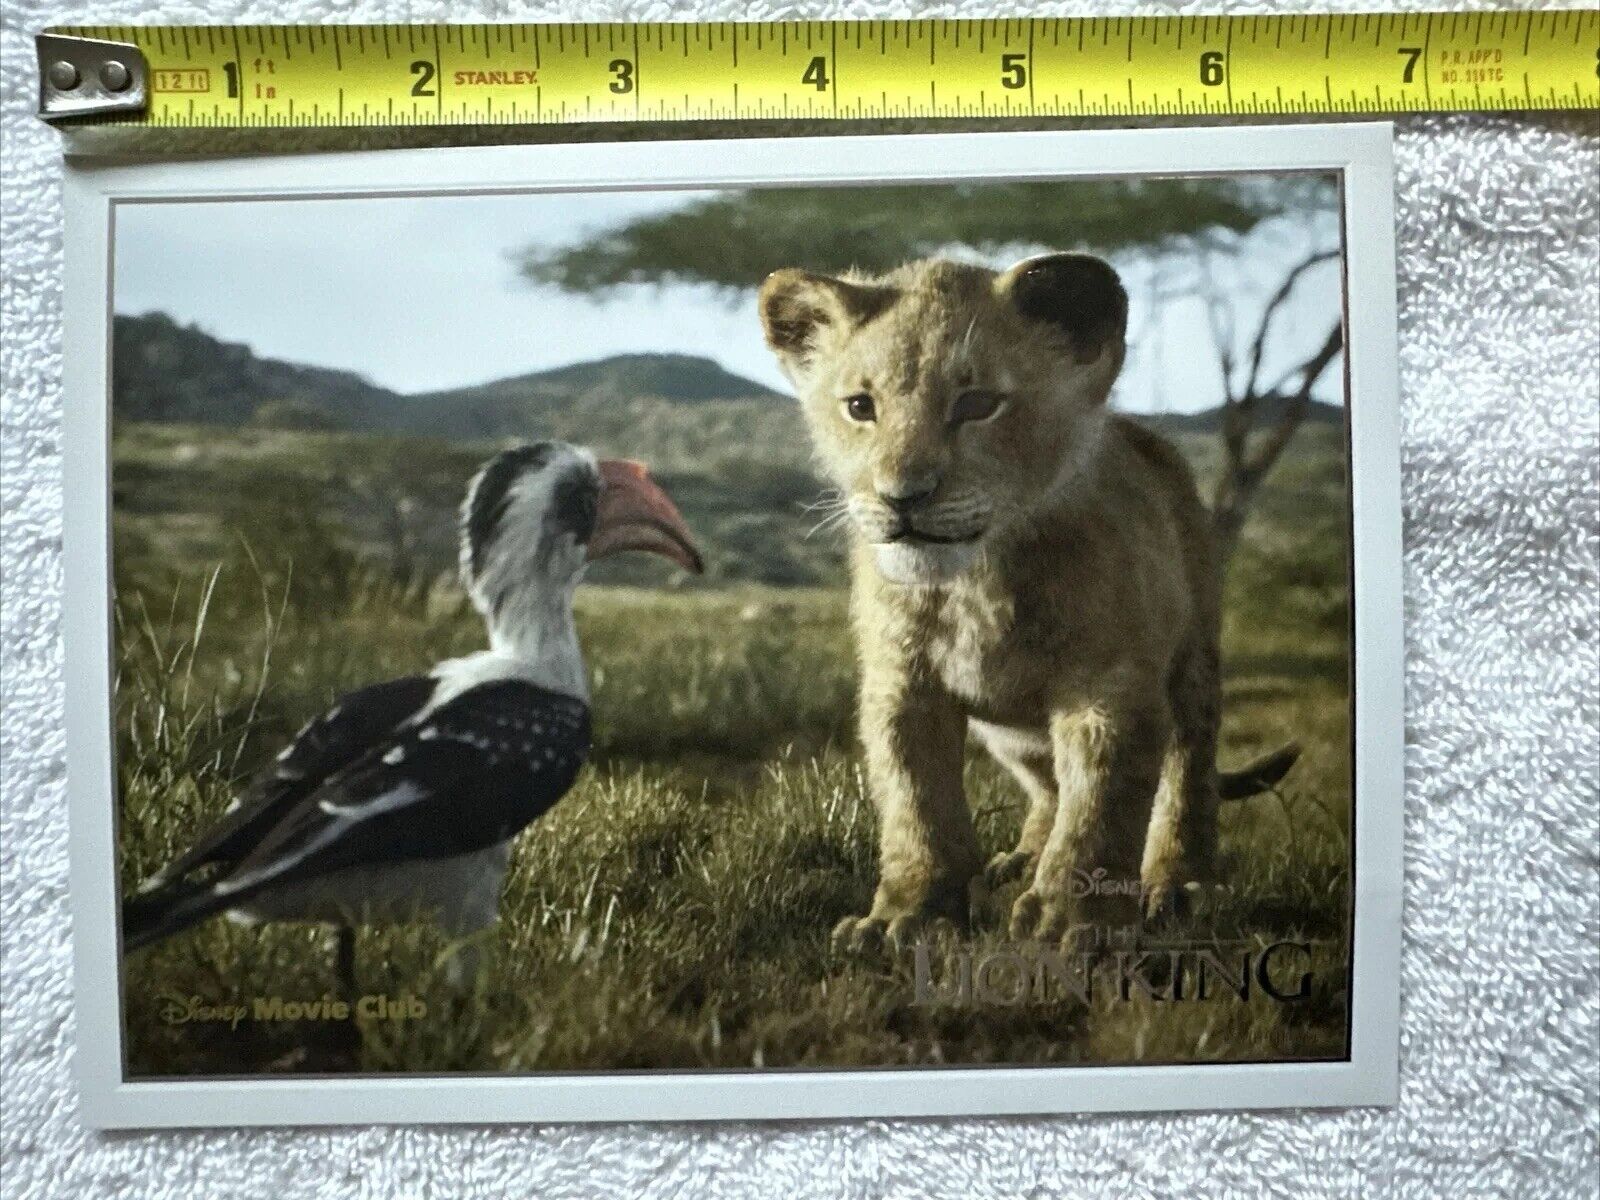 The Lion King Lithograph Disney Movie Club Exclusive 5x7